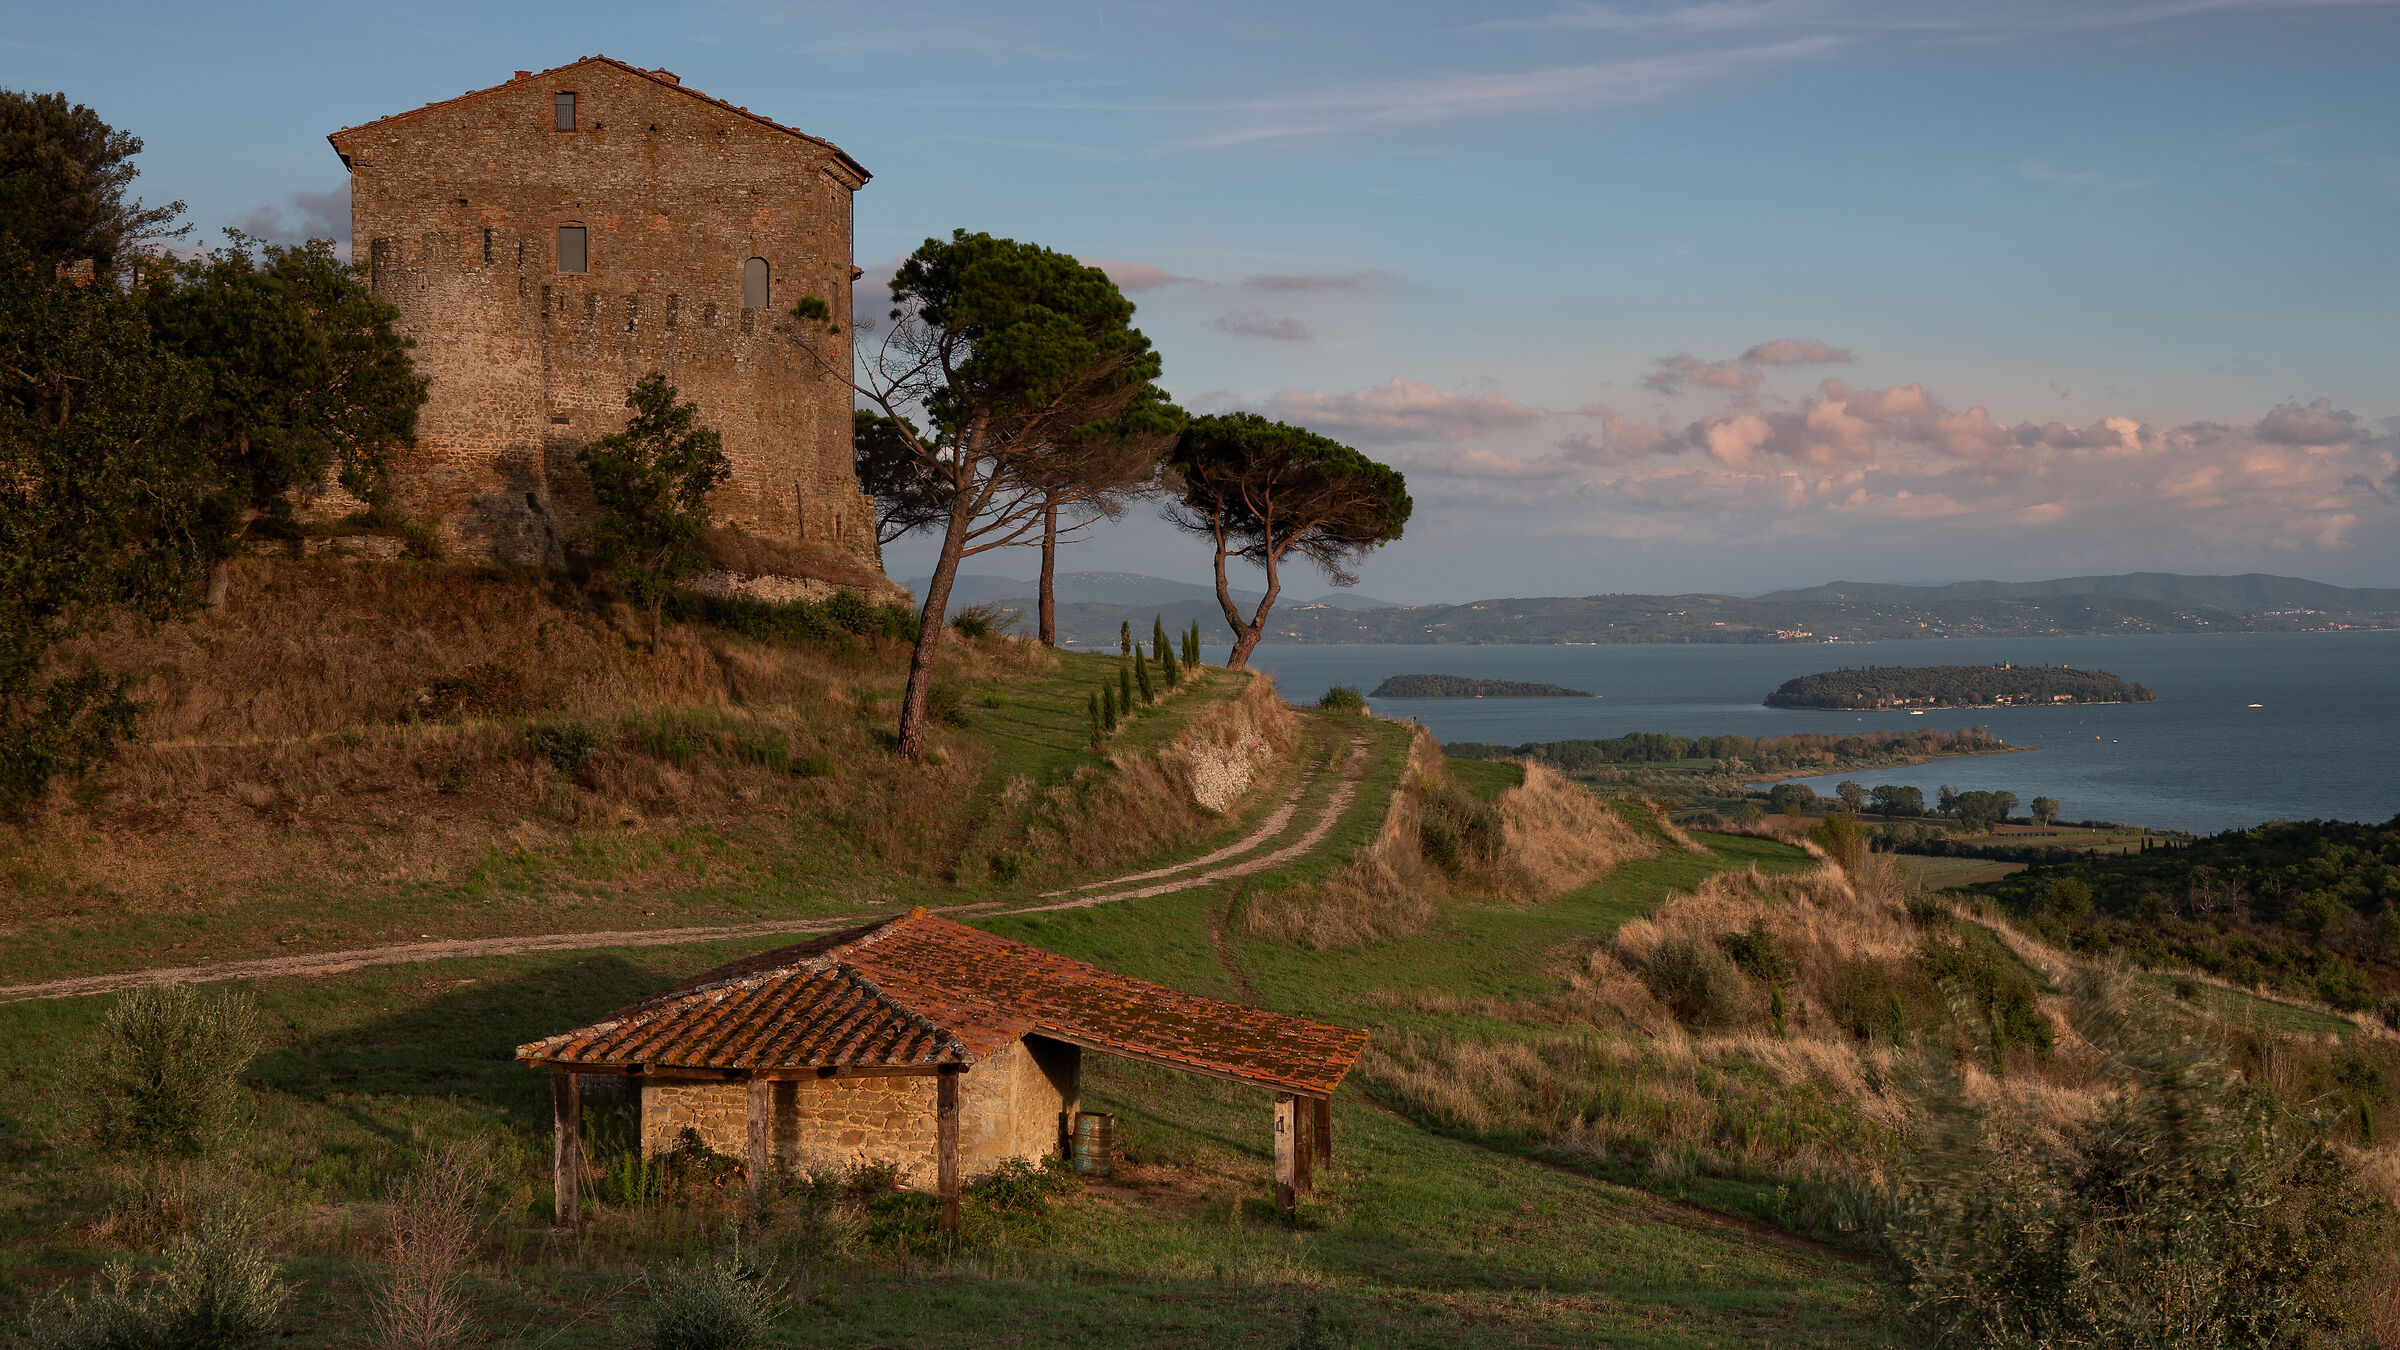 From the castle of Montegualandro to the Trasimeno...